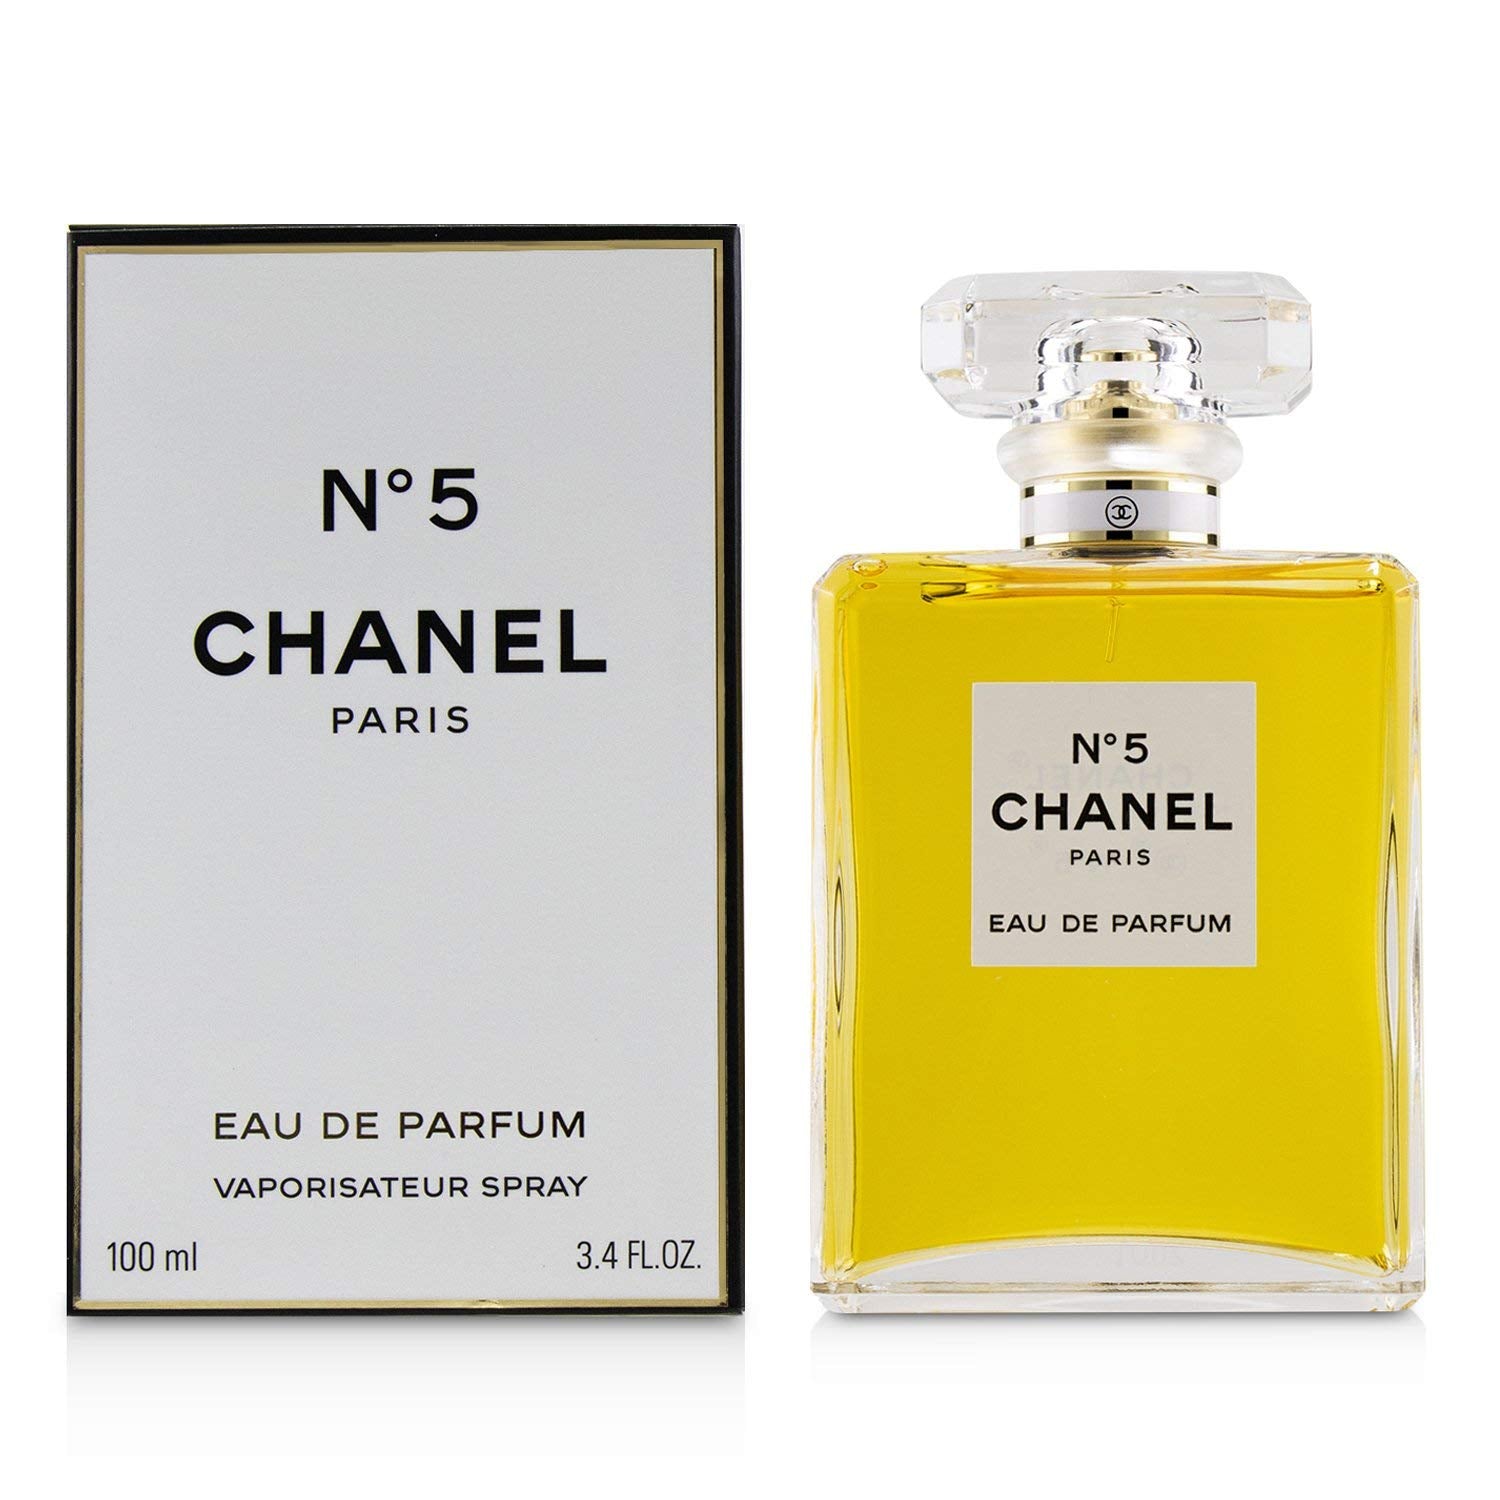 Brand new Chanel No. 5 perfume for Sale in Honolulu, HI - OfferUp